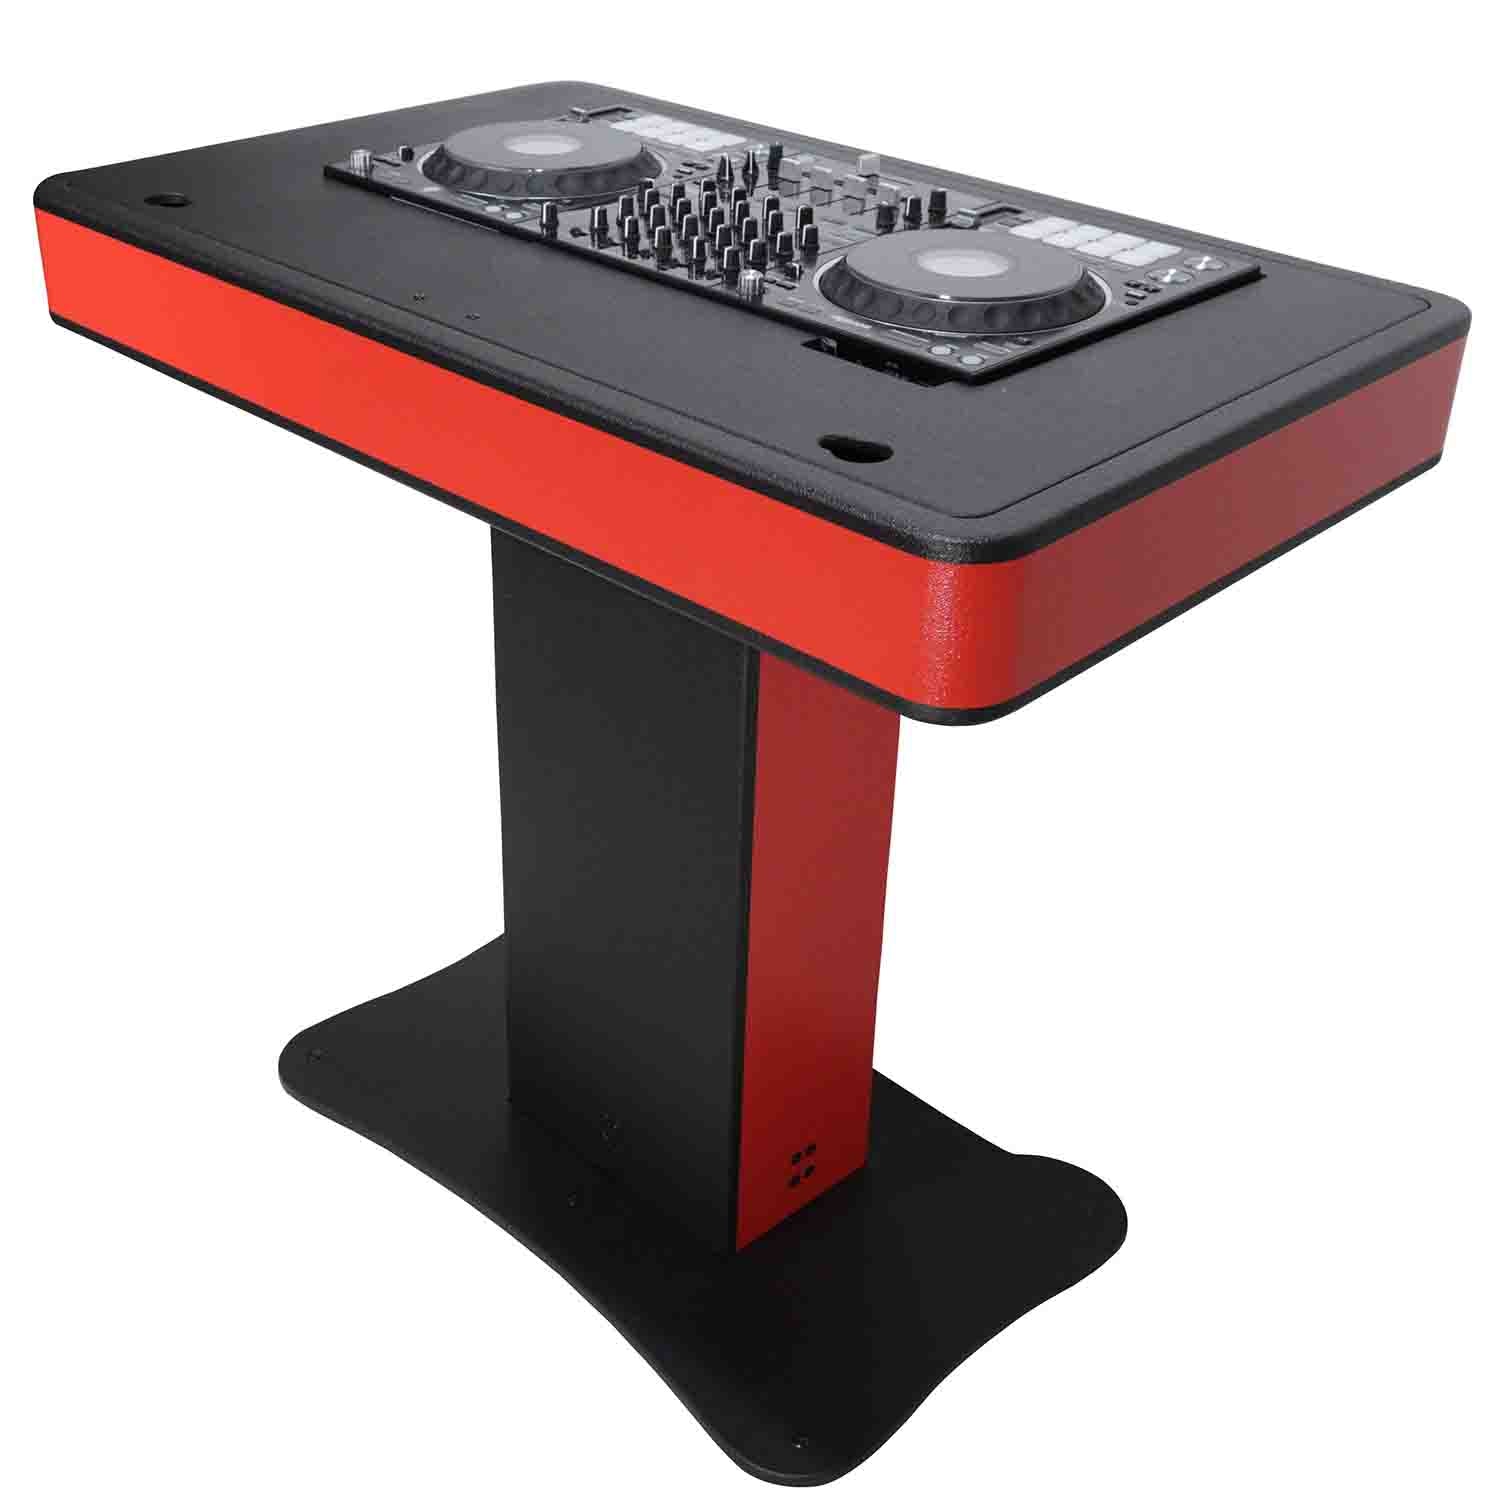 ProX XZF-DJCTRBCASE Control Tower DJ Booth with Laptop Arm and Road Cases for Pioneer XDJ-XZ, DDJ-1000 SRT, RANE ONE, and SX3 - Red Black Finish - Hollywood DJ